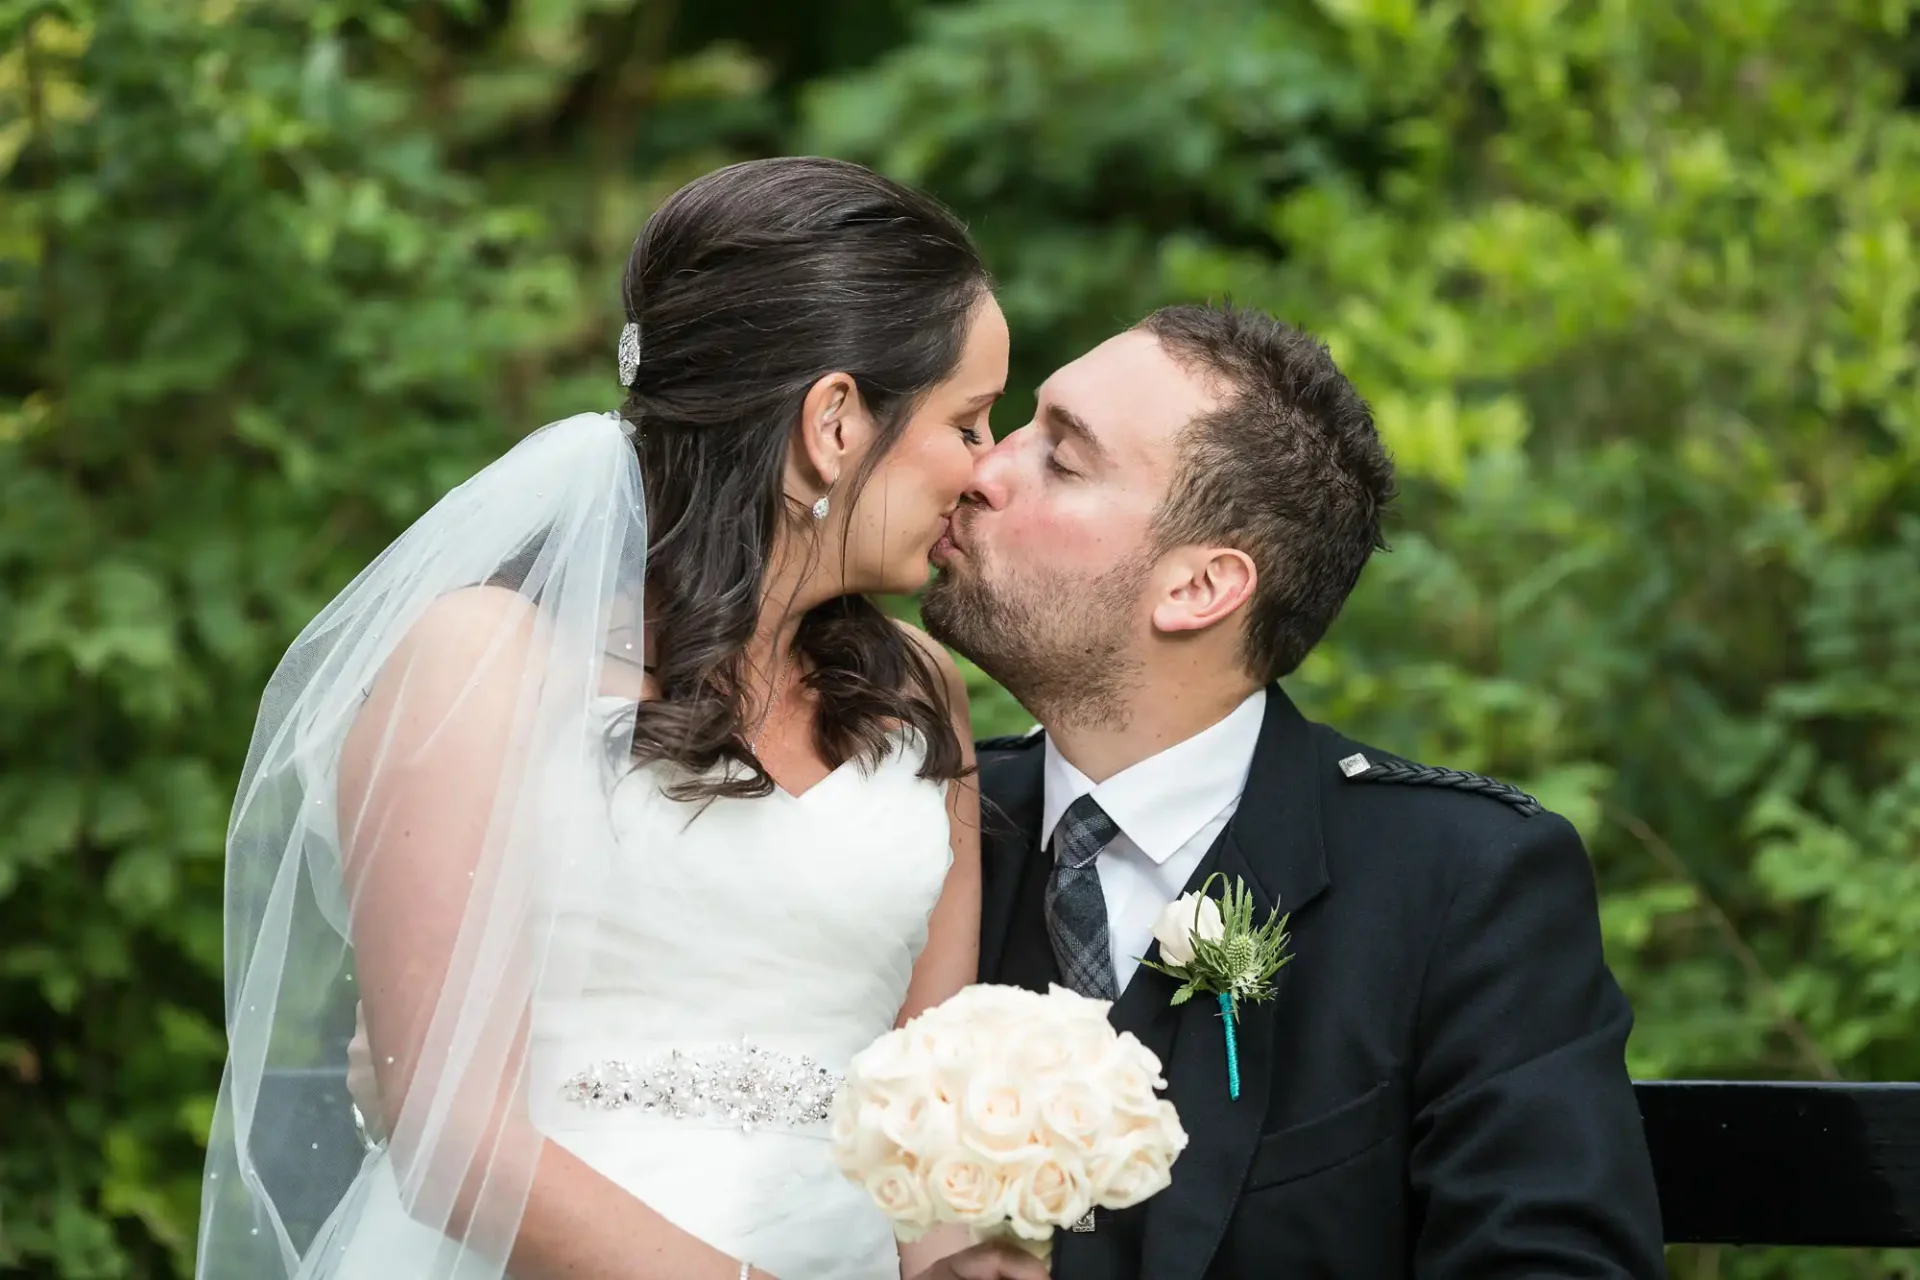 A bride and groom in wedding attire kissing in a lush green park, with the bride holding a bouquet of white roses.